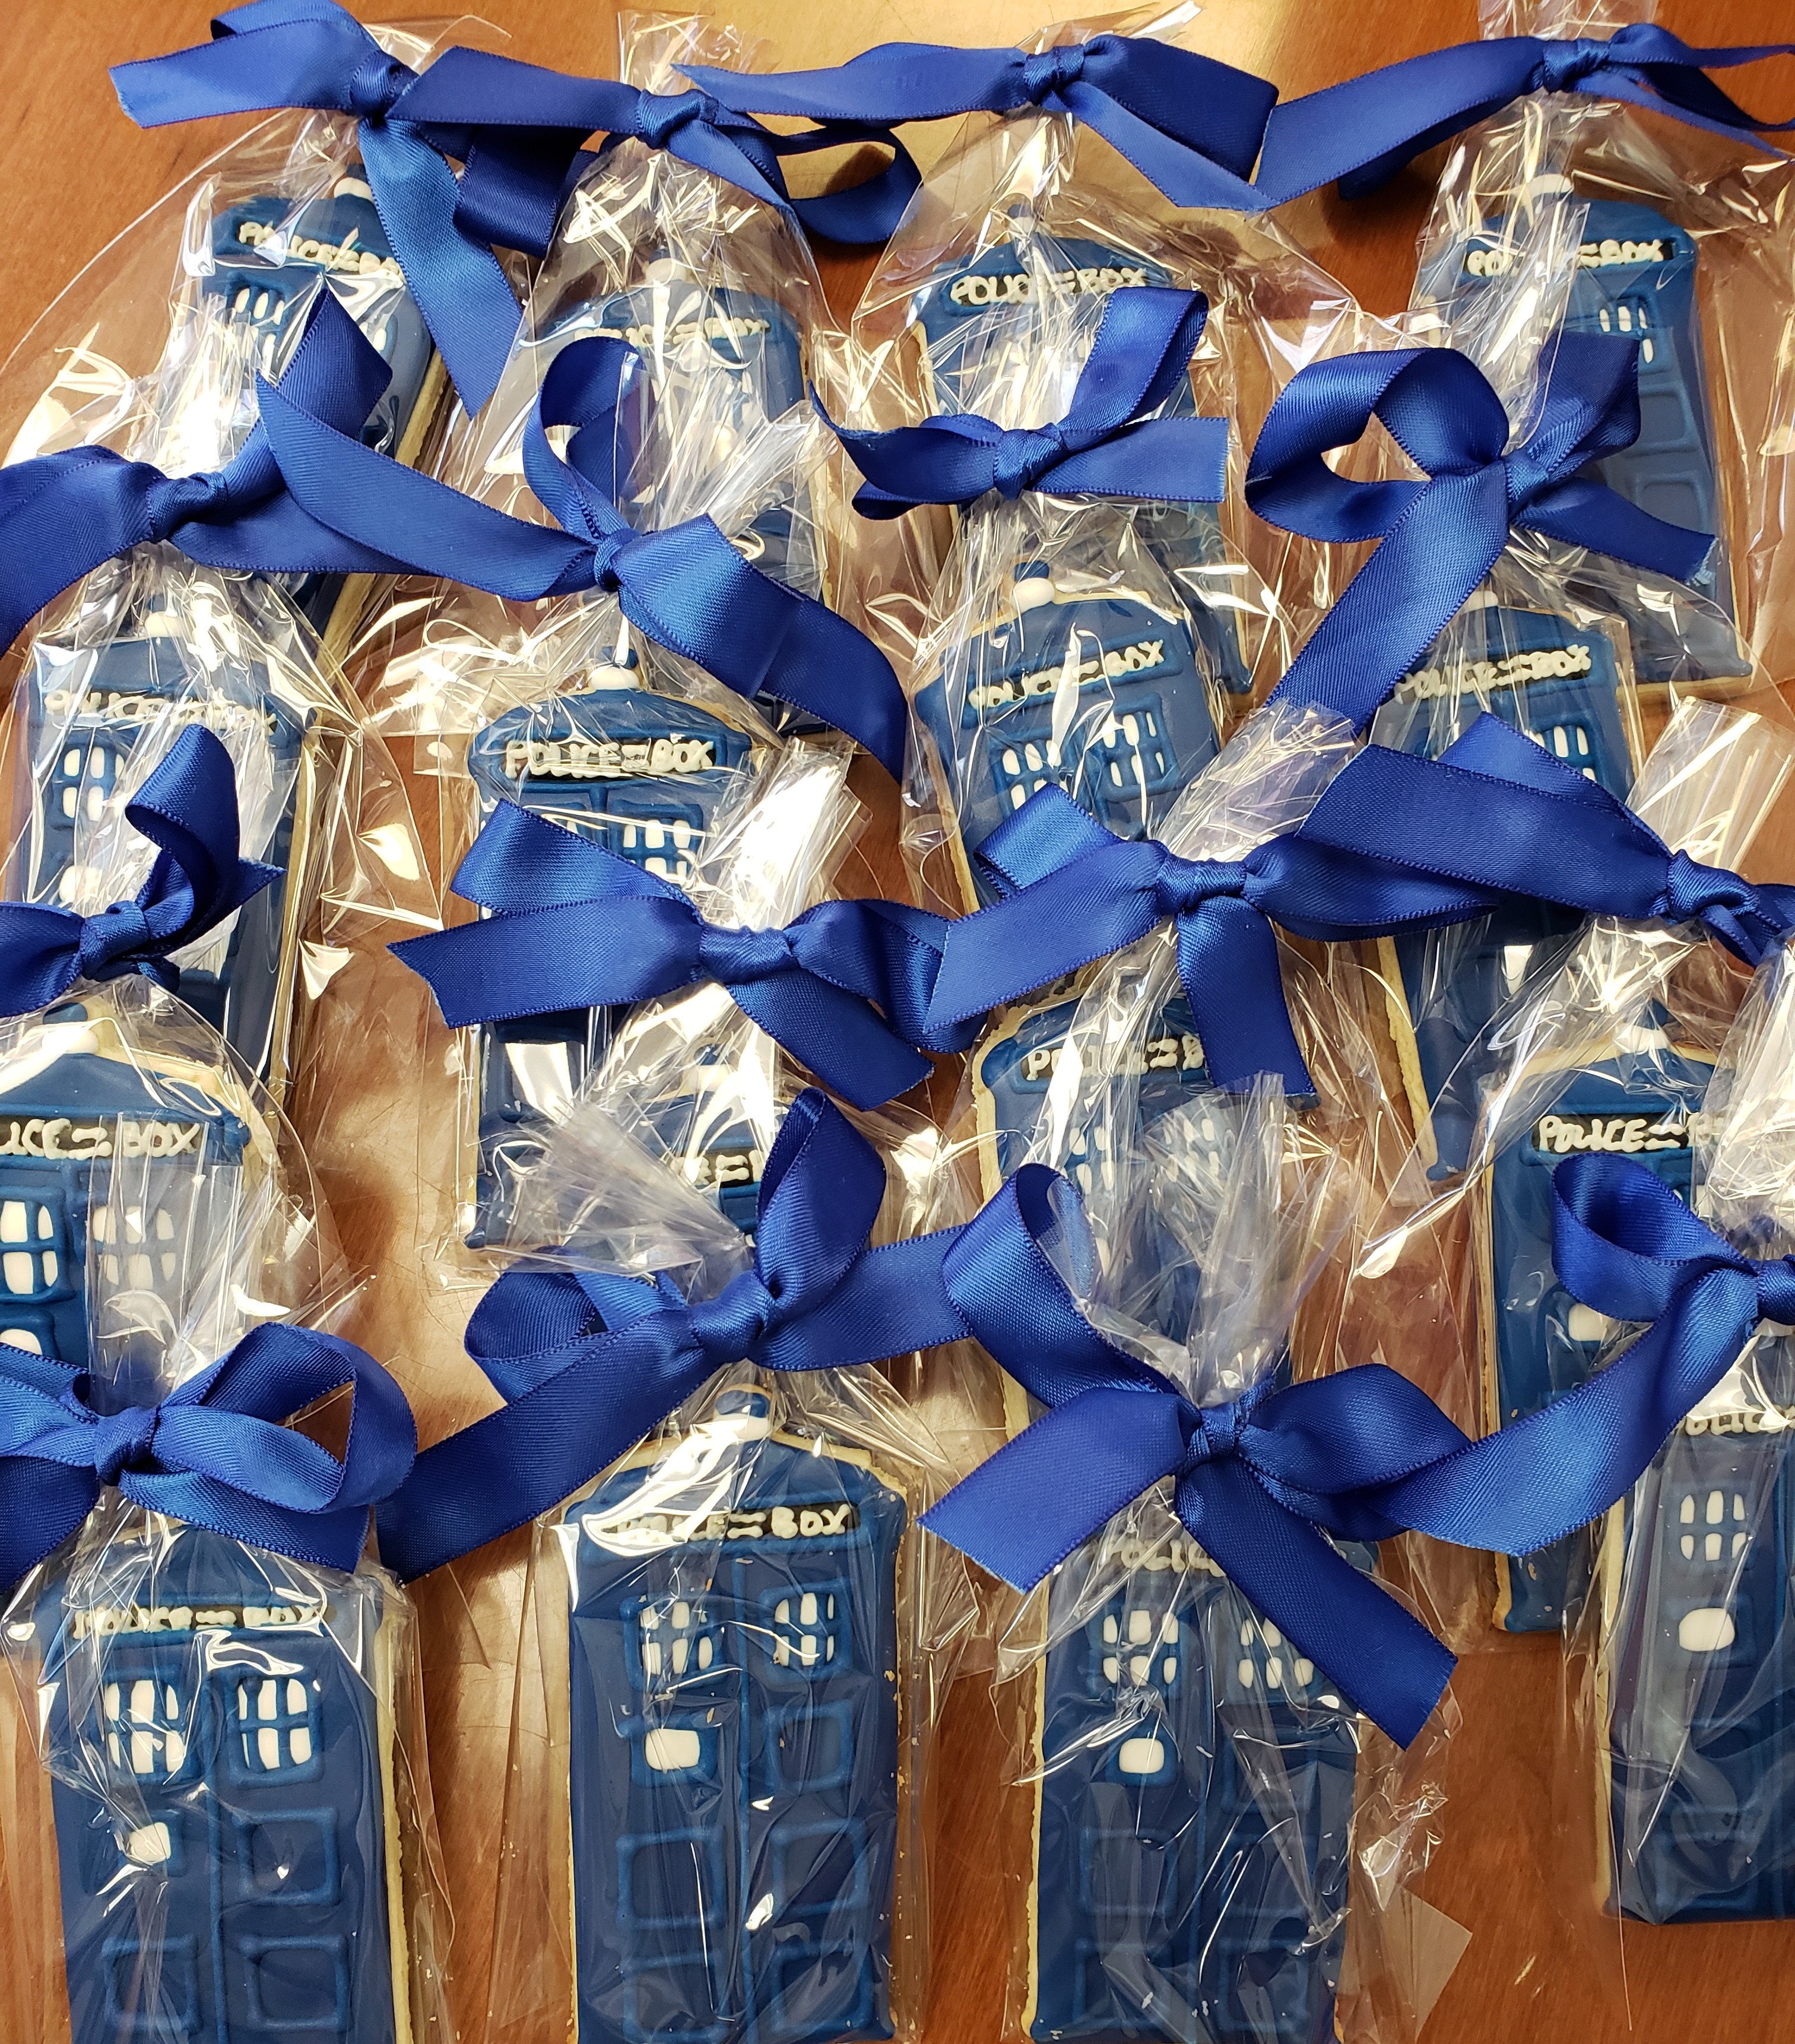 Cookies shaped like the Dr. Who Tardis (blue phone booth)